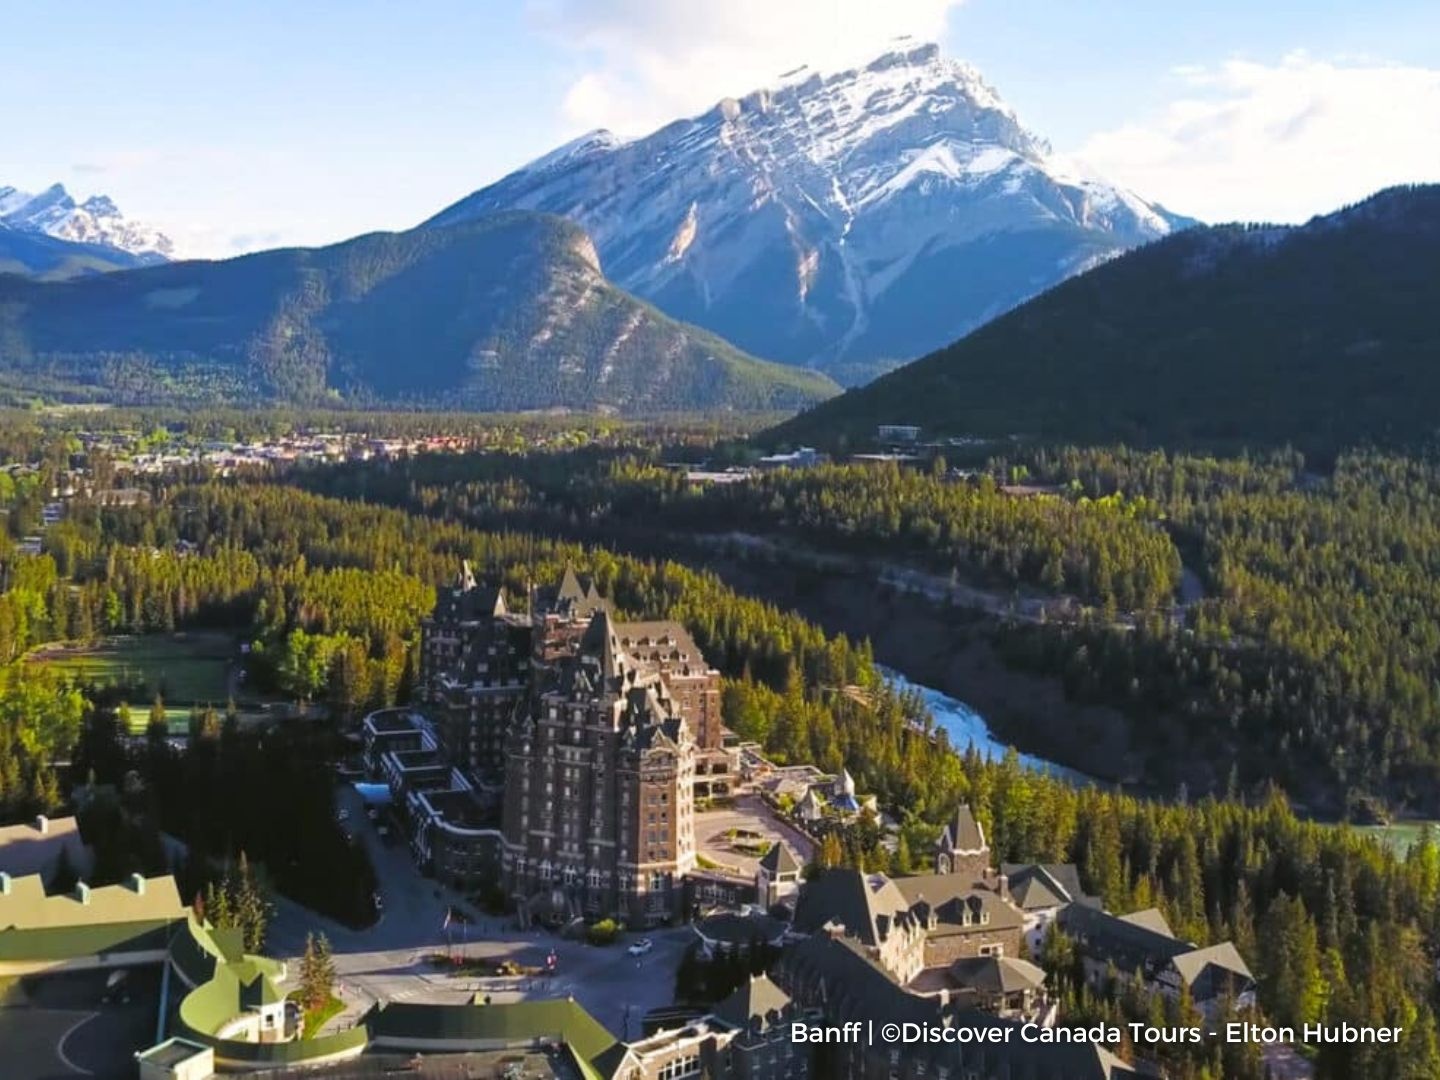 5-Day Rockies Summer Premium Tour from Vancouver: Blue River, Banff and Revelstoke